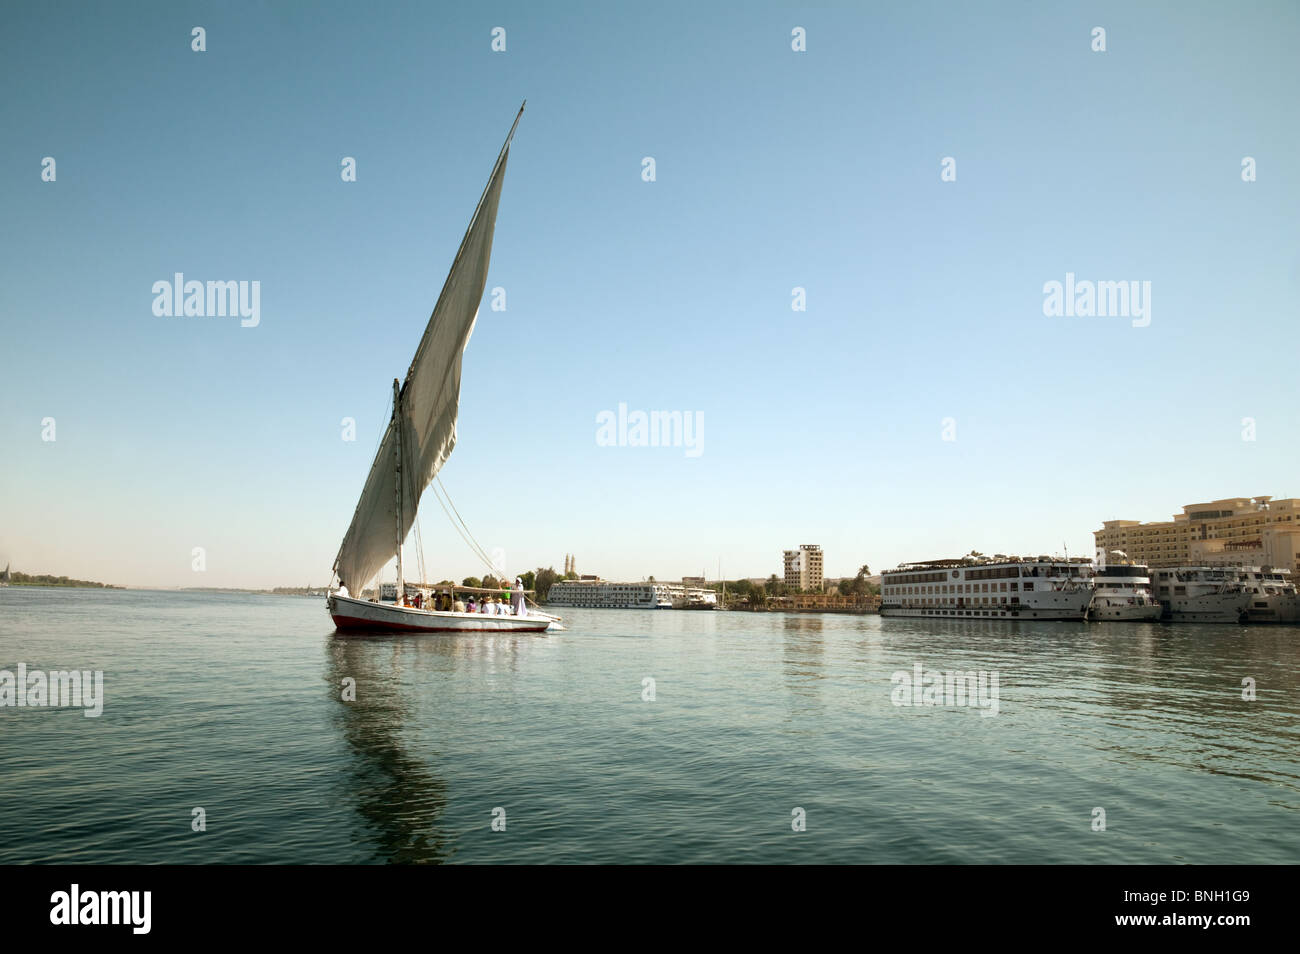 A Felucca sailing on the river Nile at Aswan, Upper Egypt Stock Photo